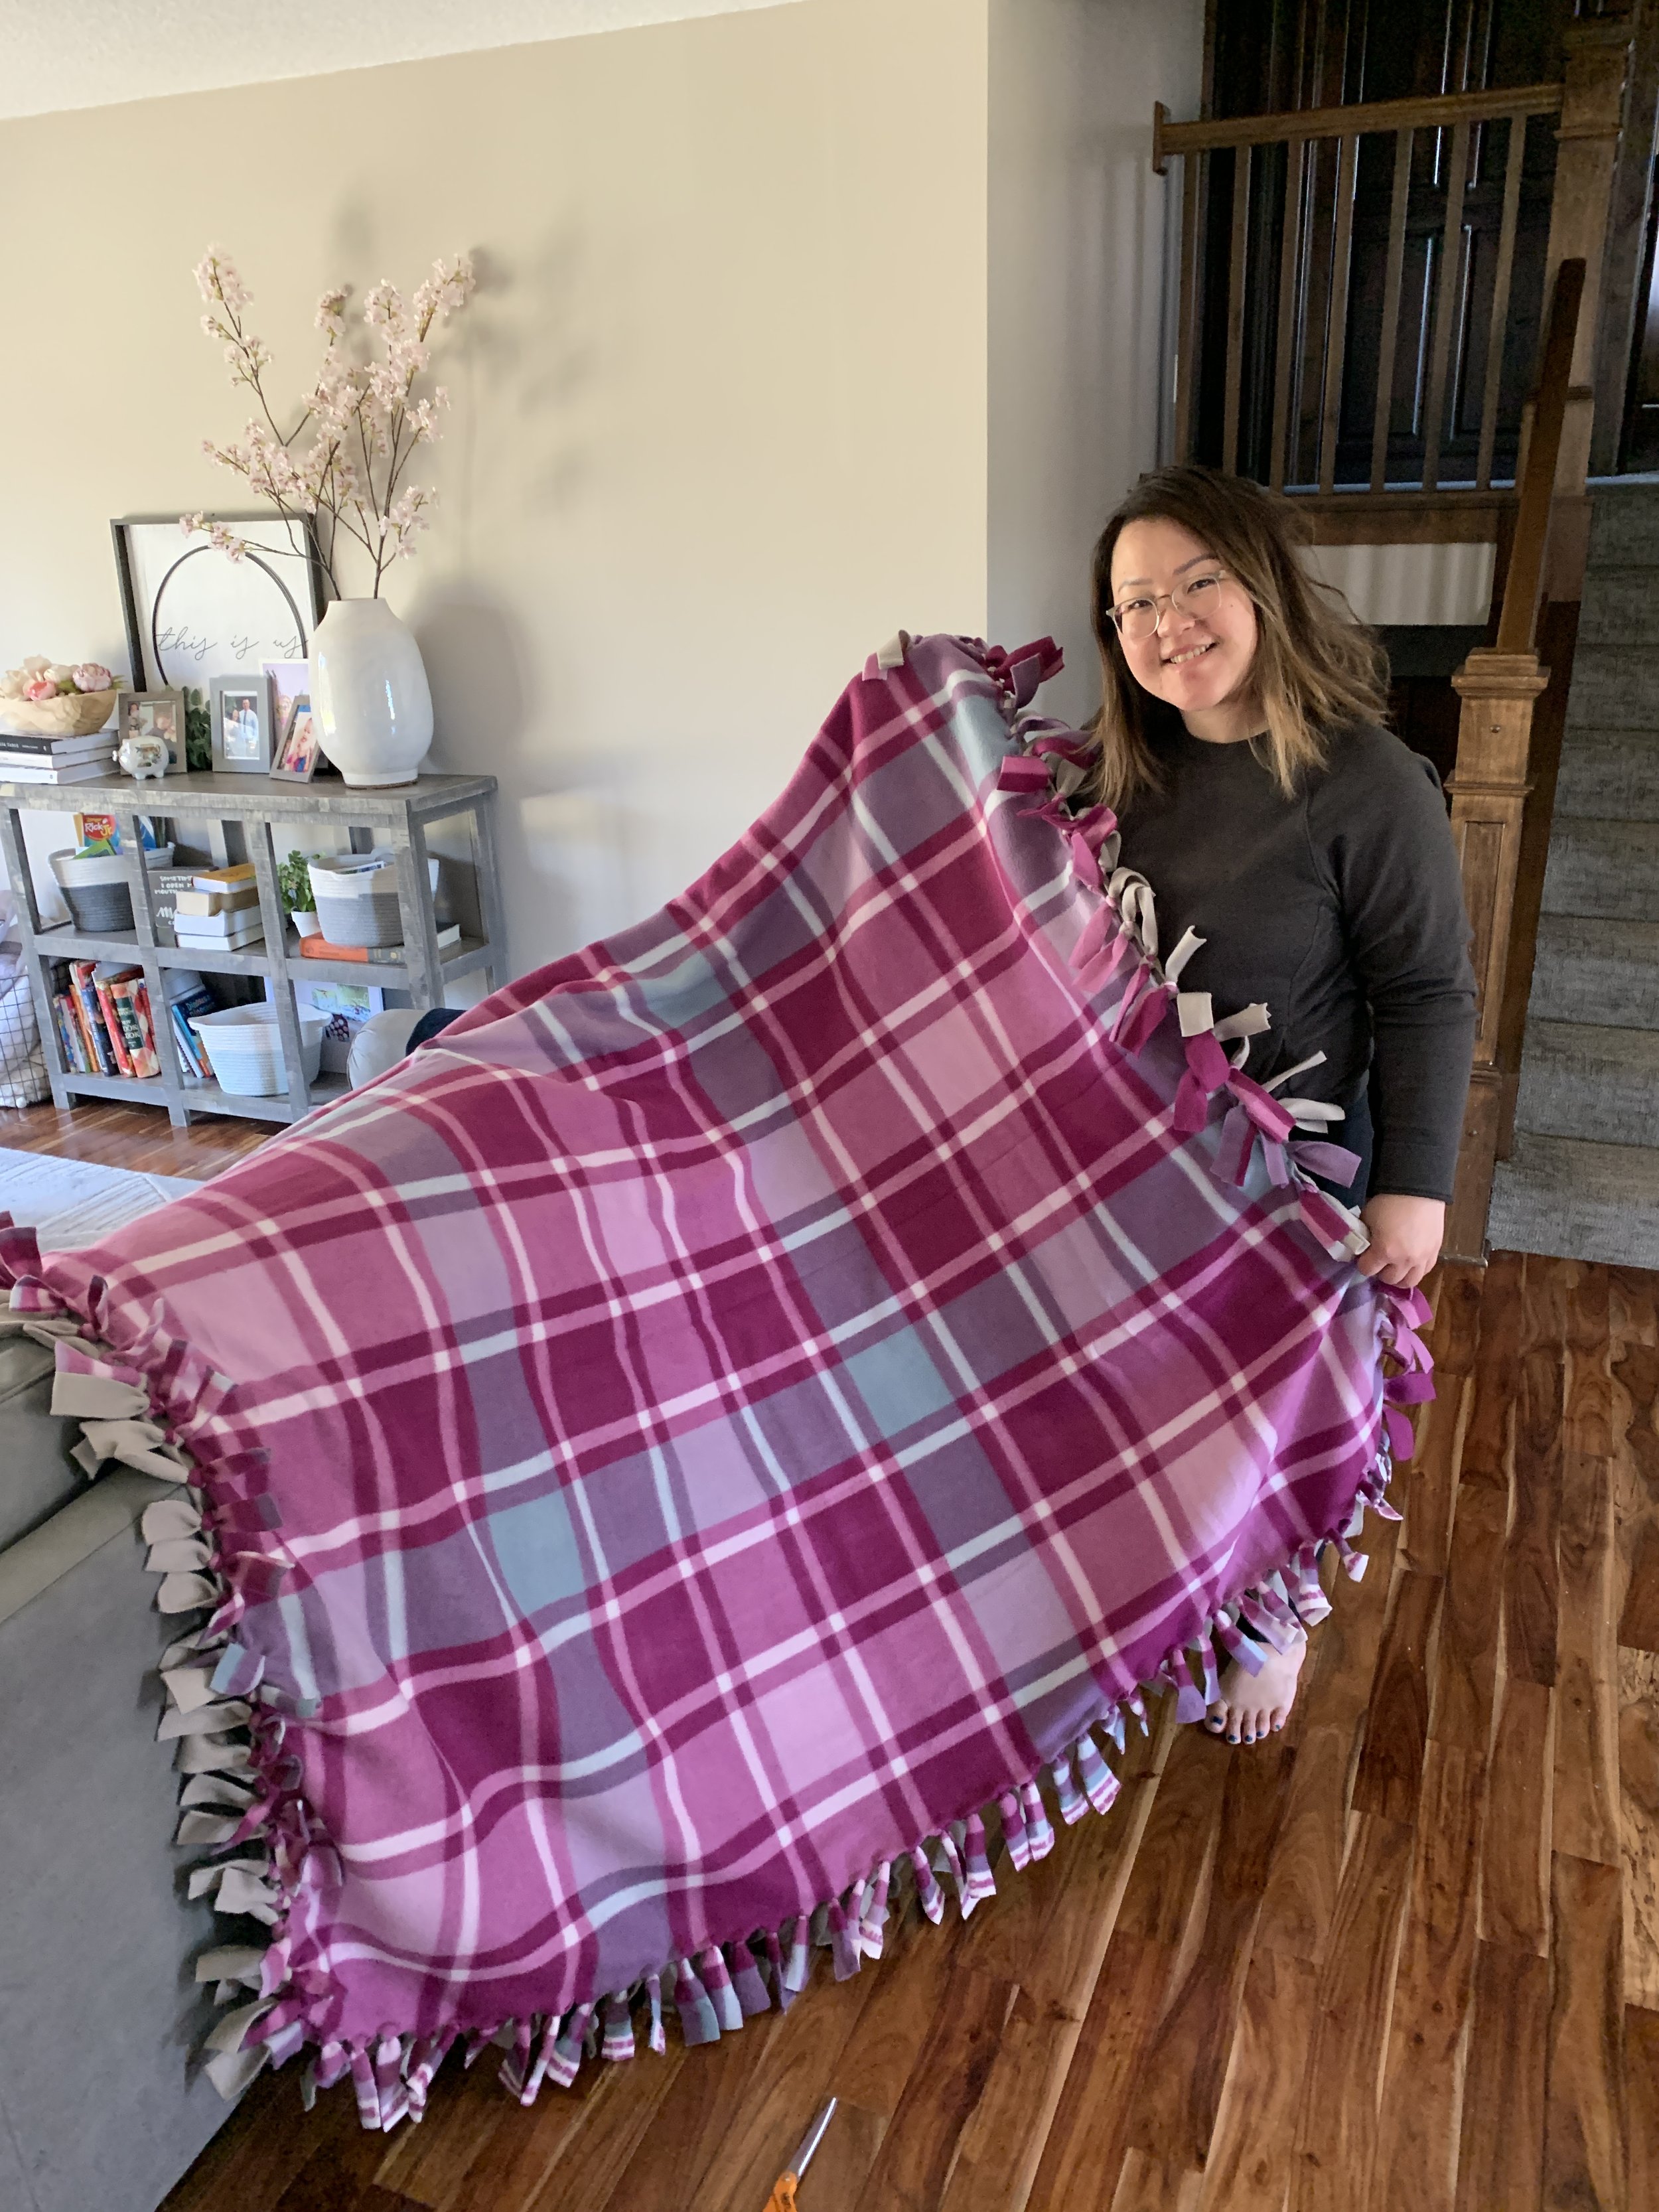 How to Make a Tie Blanket from Fleece 